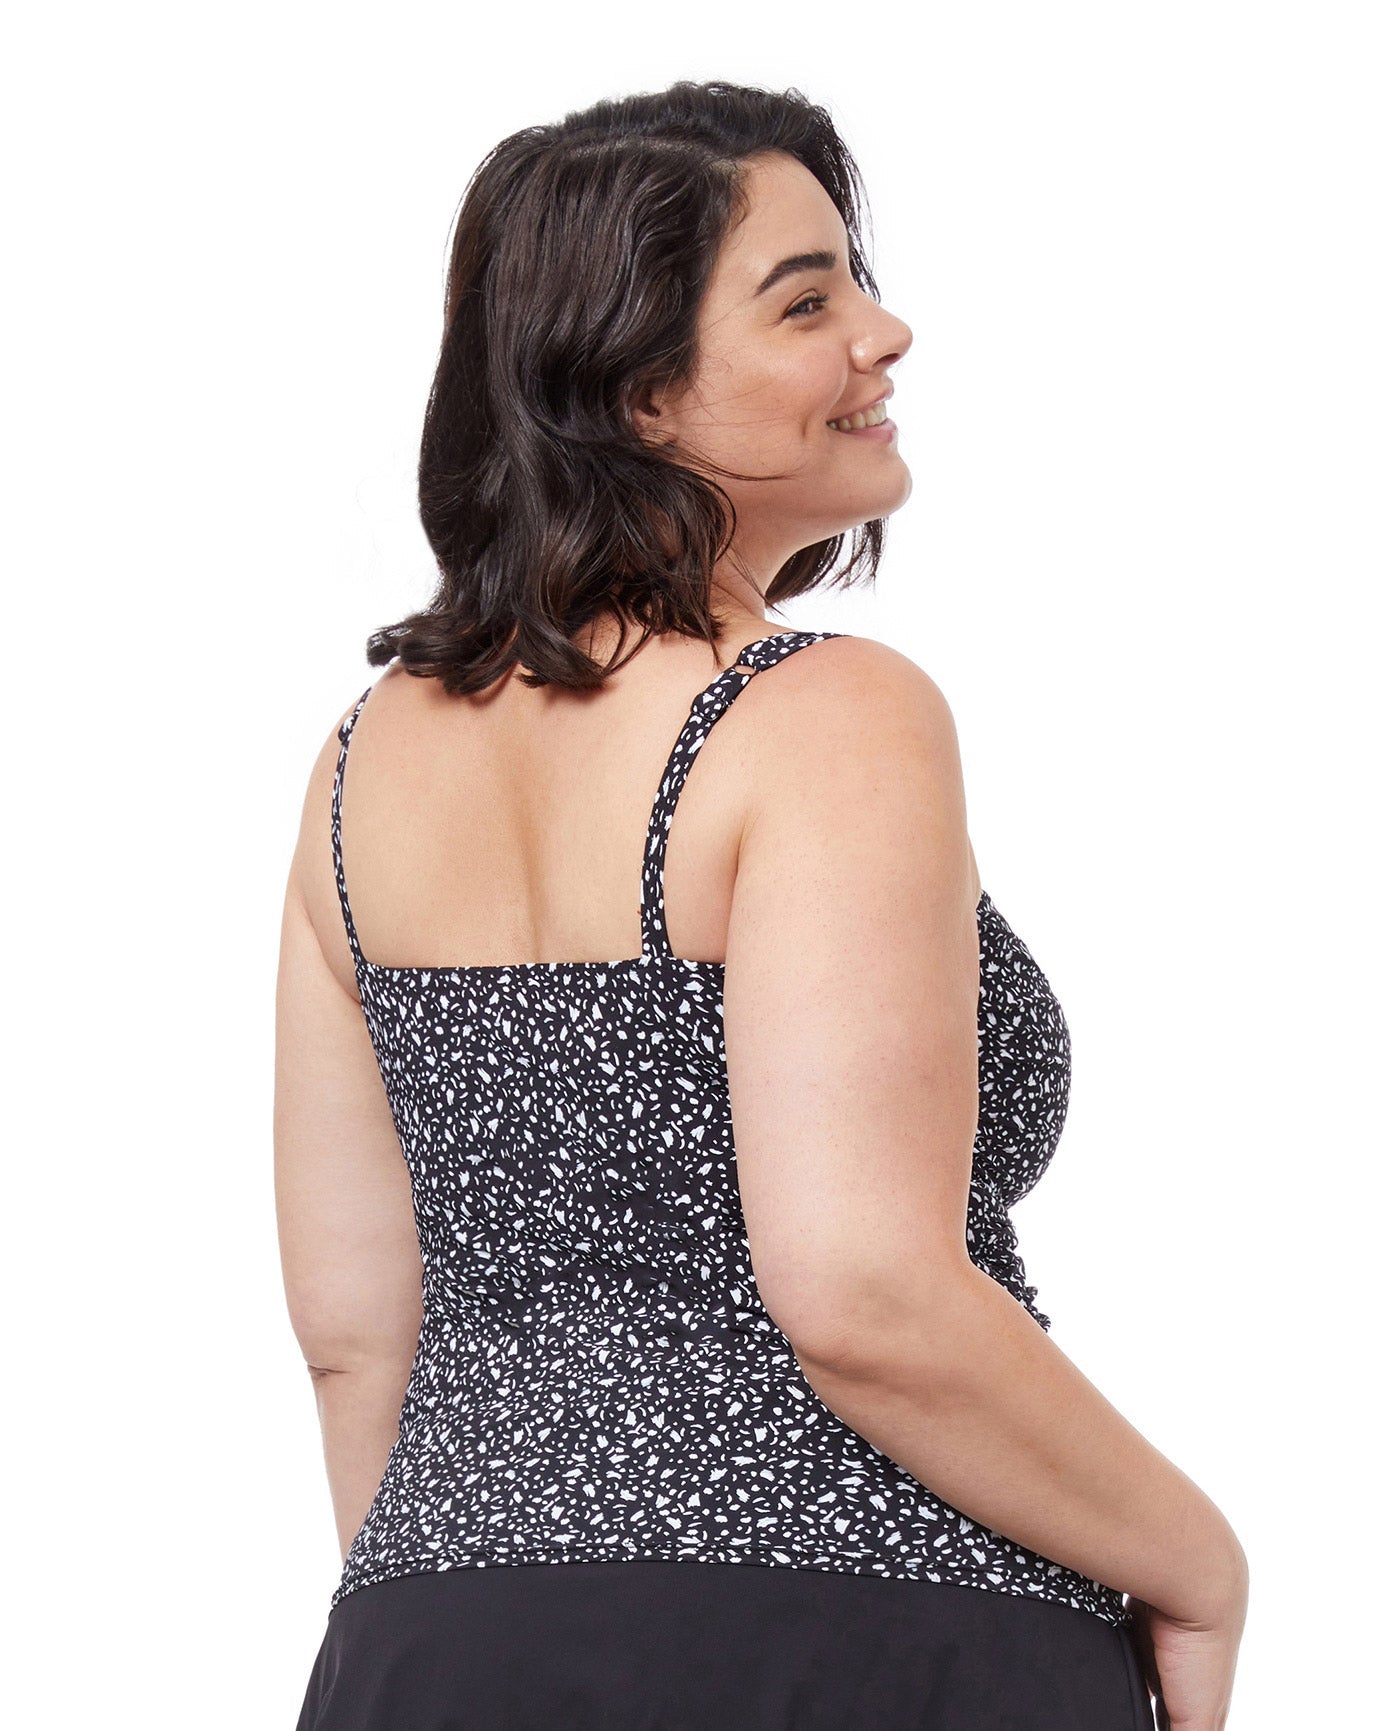 Profile by Gottex Bash D-Cup Shirred Underwire Tankini Top